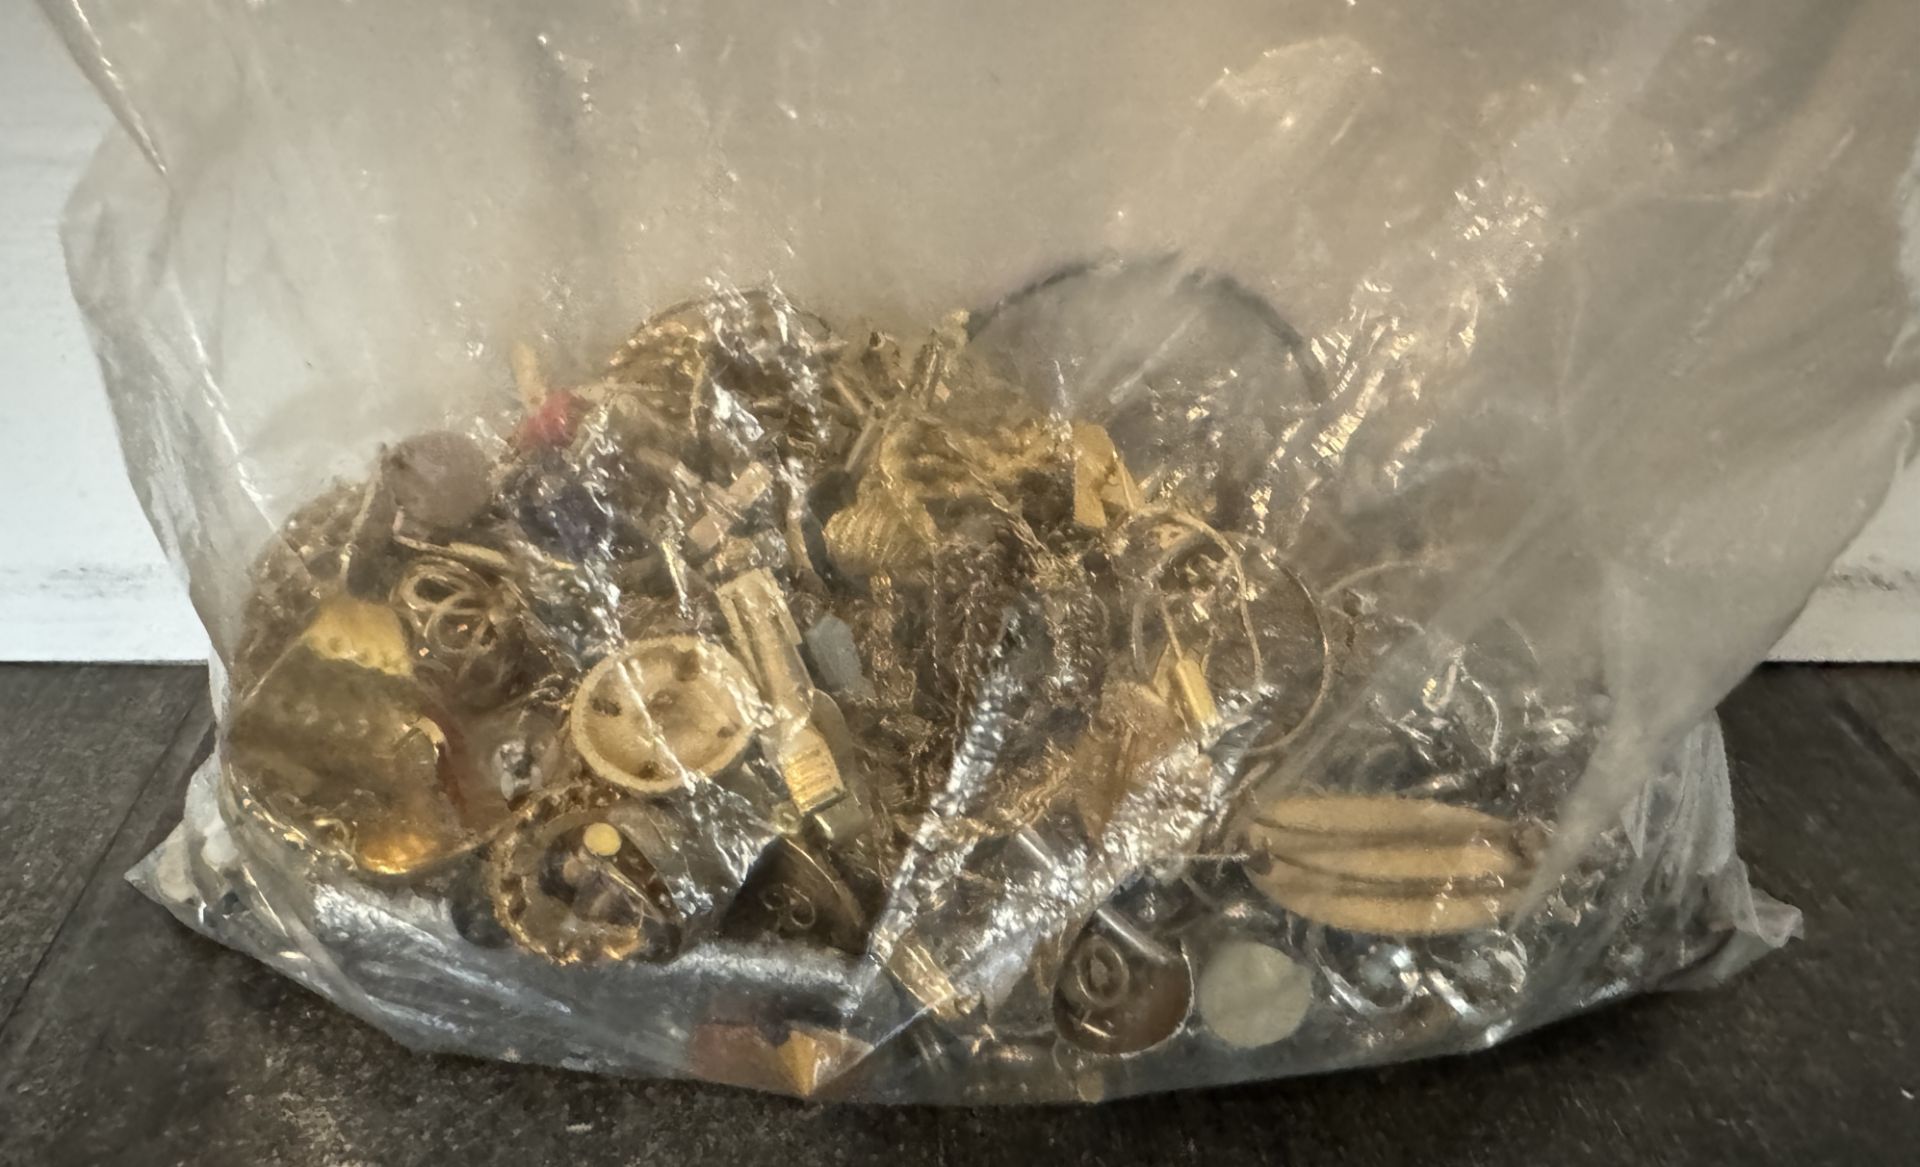 BAG OF MIXED UNSORTED JEWELRY / SOME SORT OF SILER BRICK INSIDE IT - Image 2 of 4